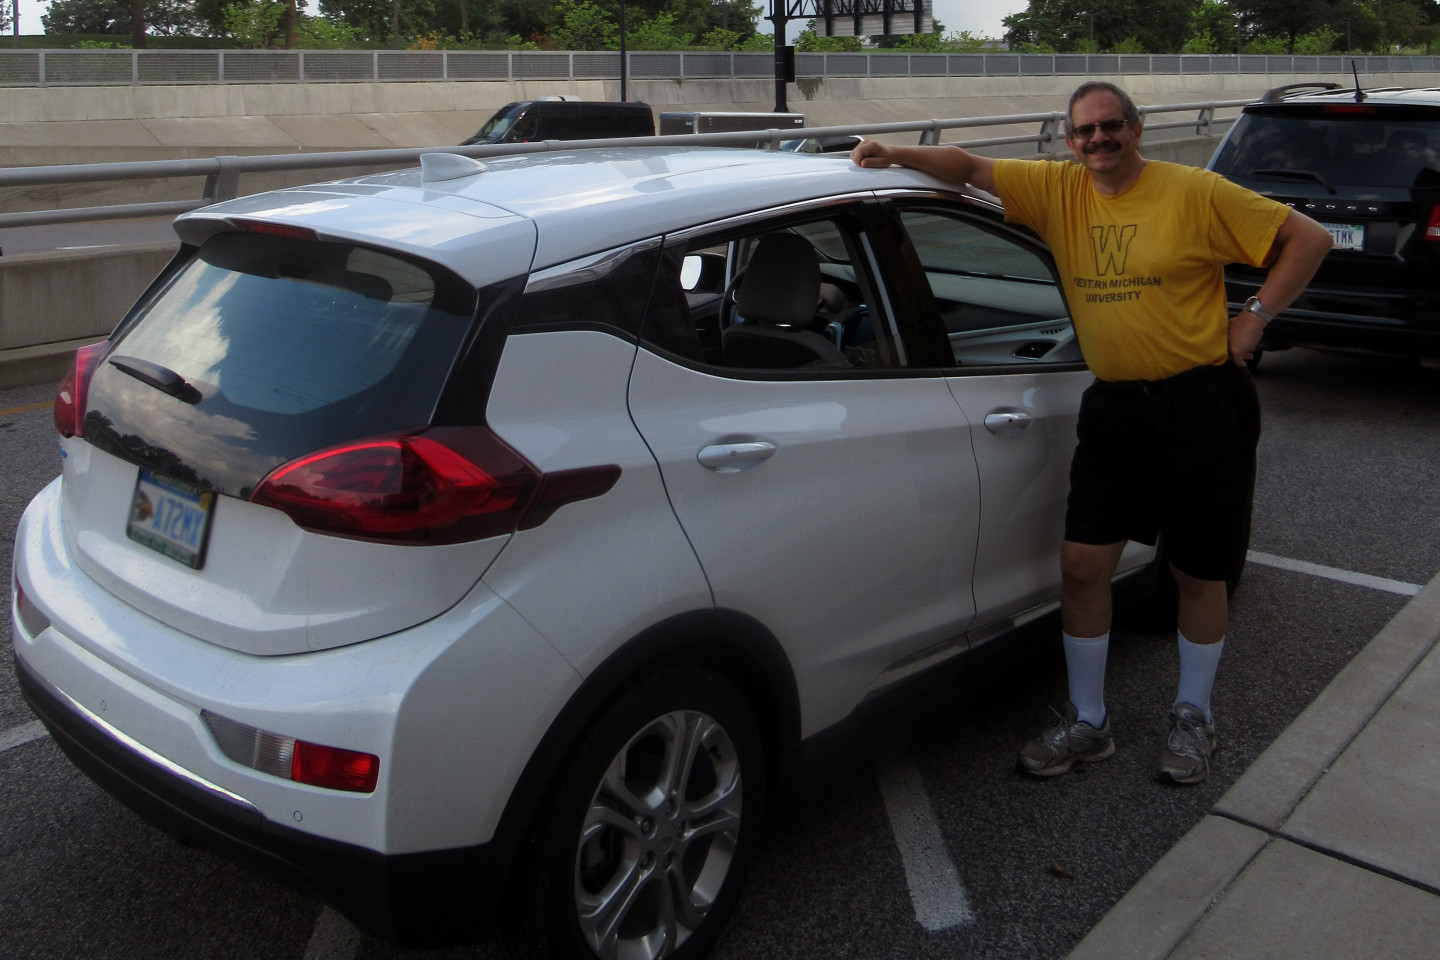 Paul Pancella stands next to a white car.